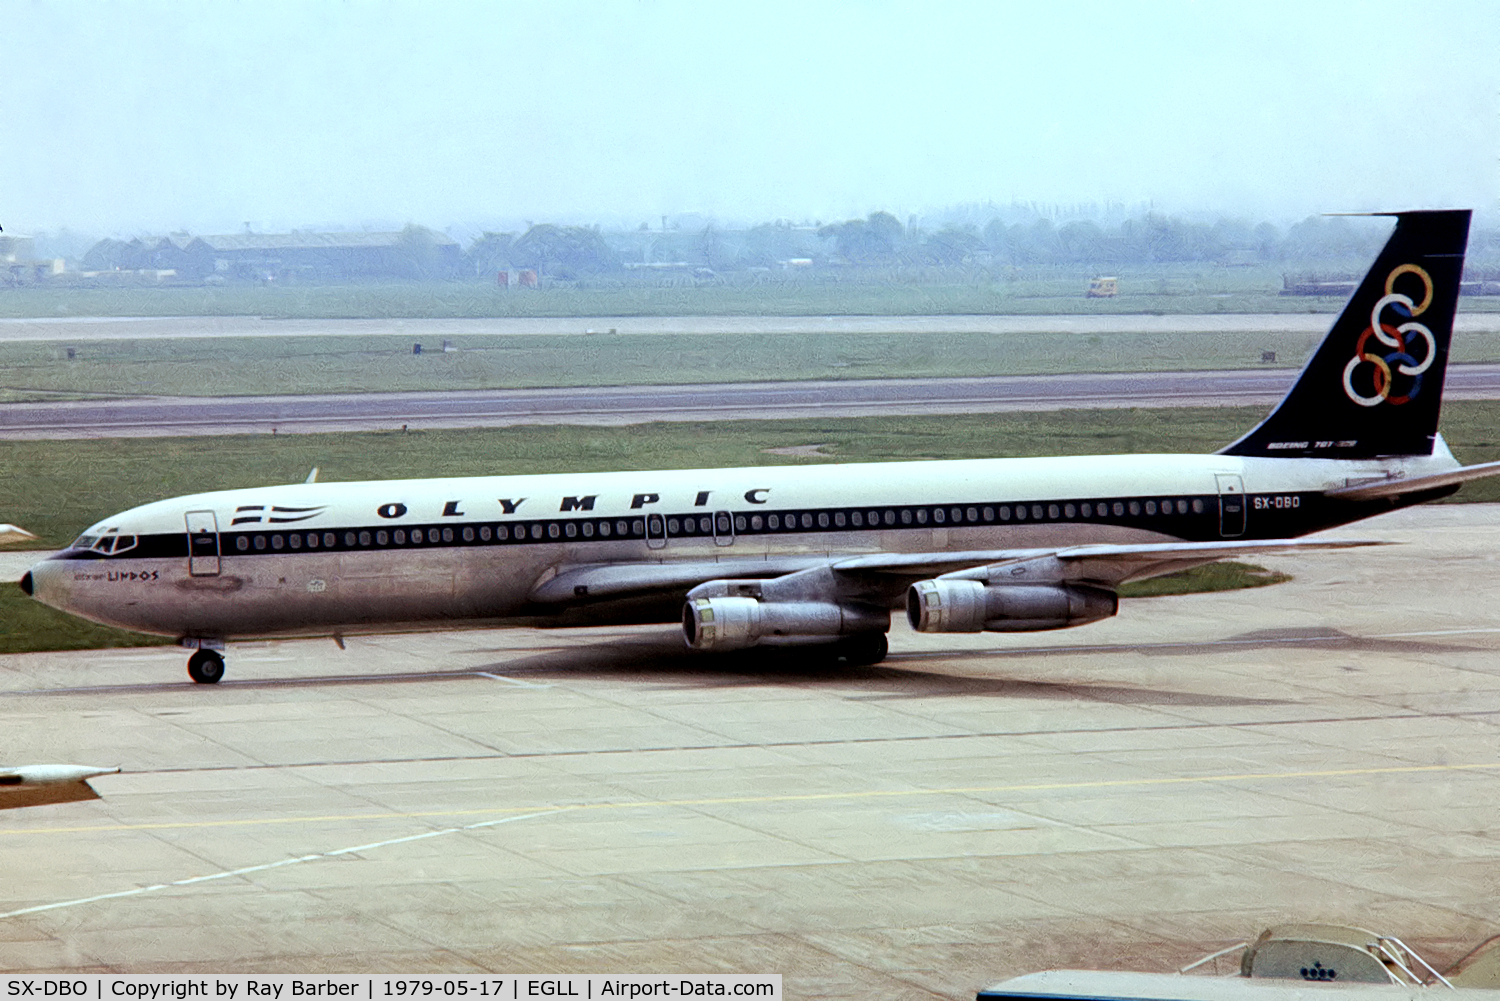 SX-DBO, 1966 Boeing 707-351C C/N 19164, Boeing 707-351C [19164] (Olympic Airways) Heathrow~G @ 17/05/1979. Date approximate from a slide.